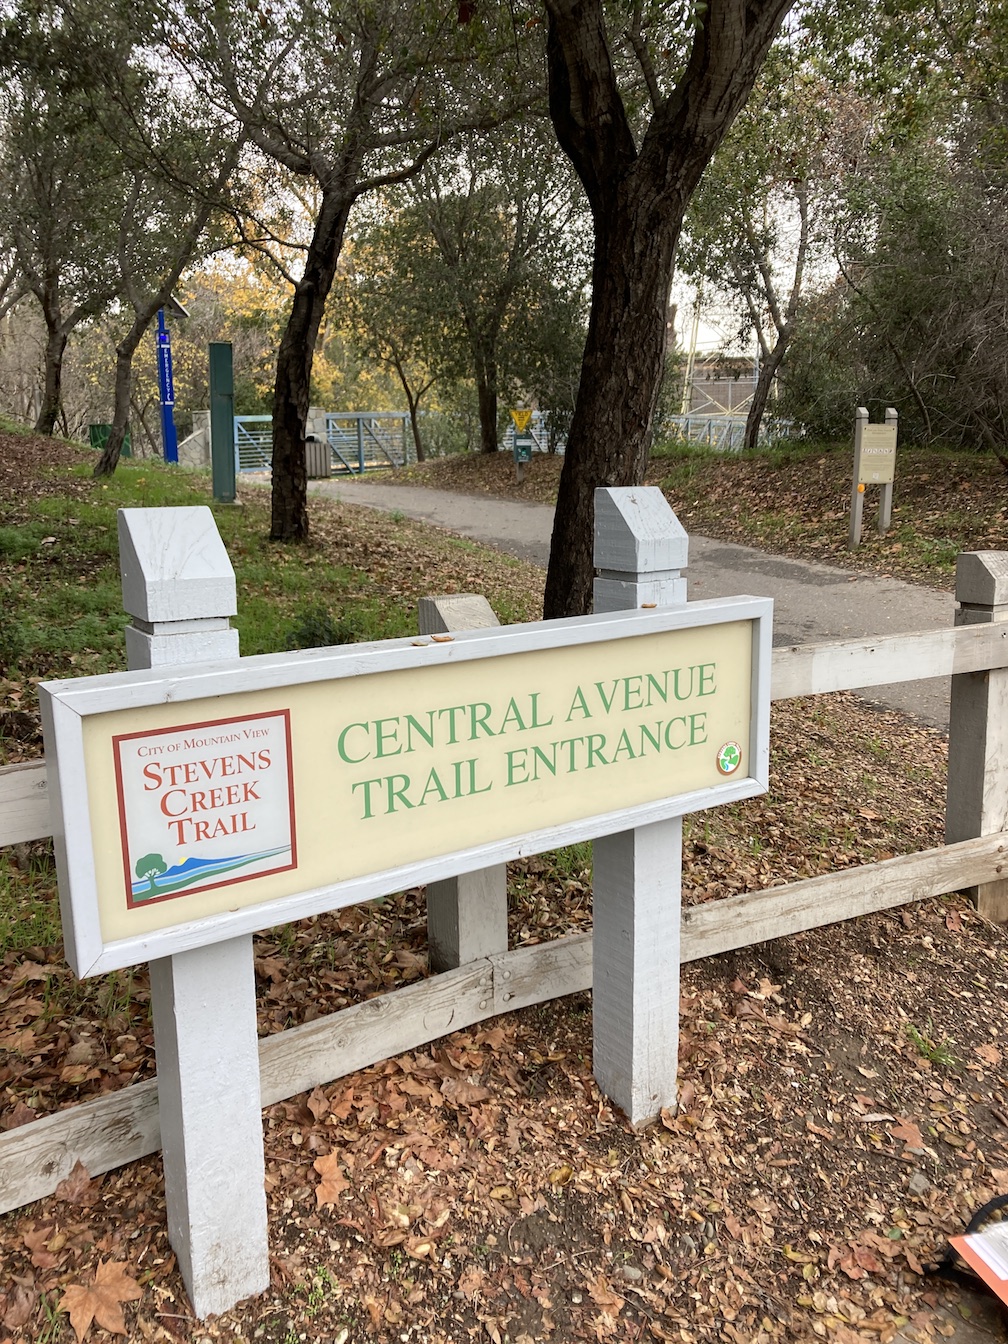 New trail medallion on the Central Avenue trail entrance sign